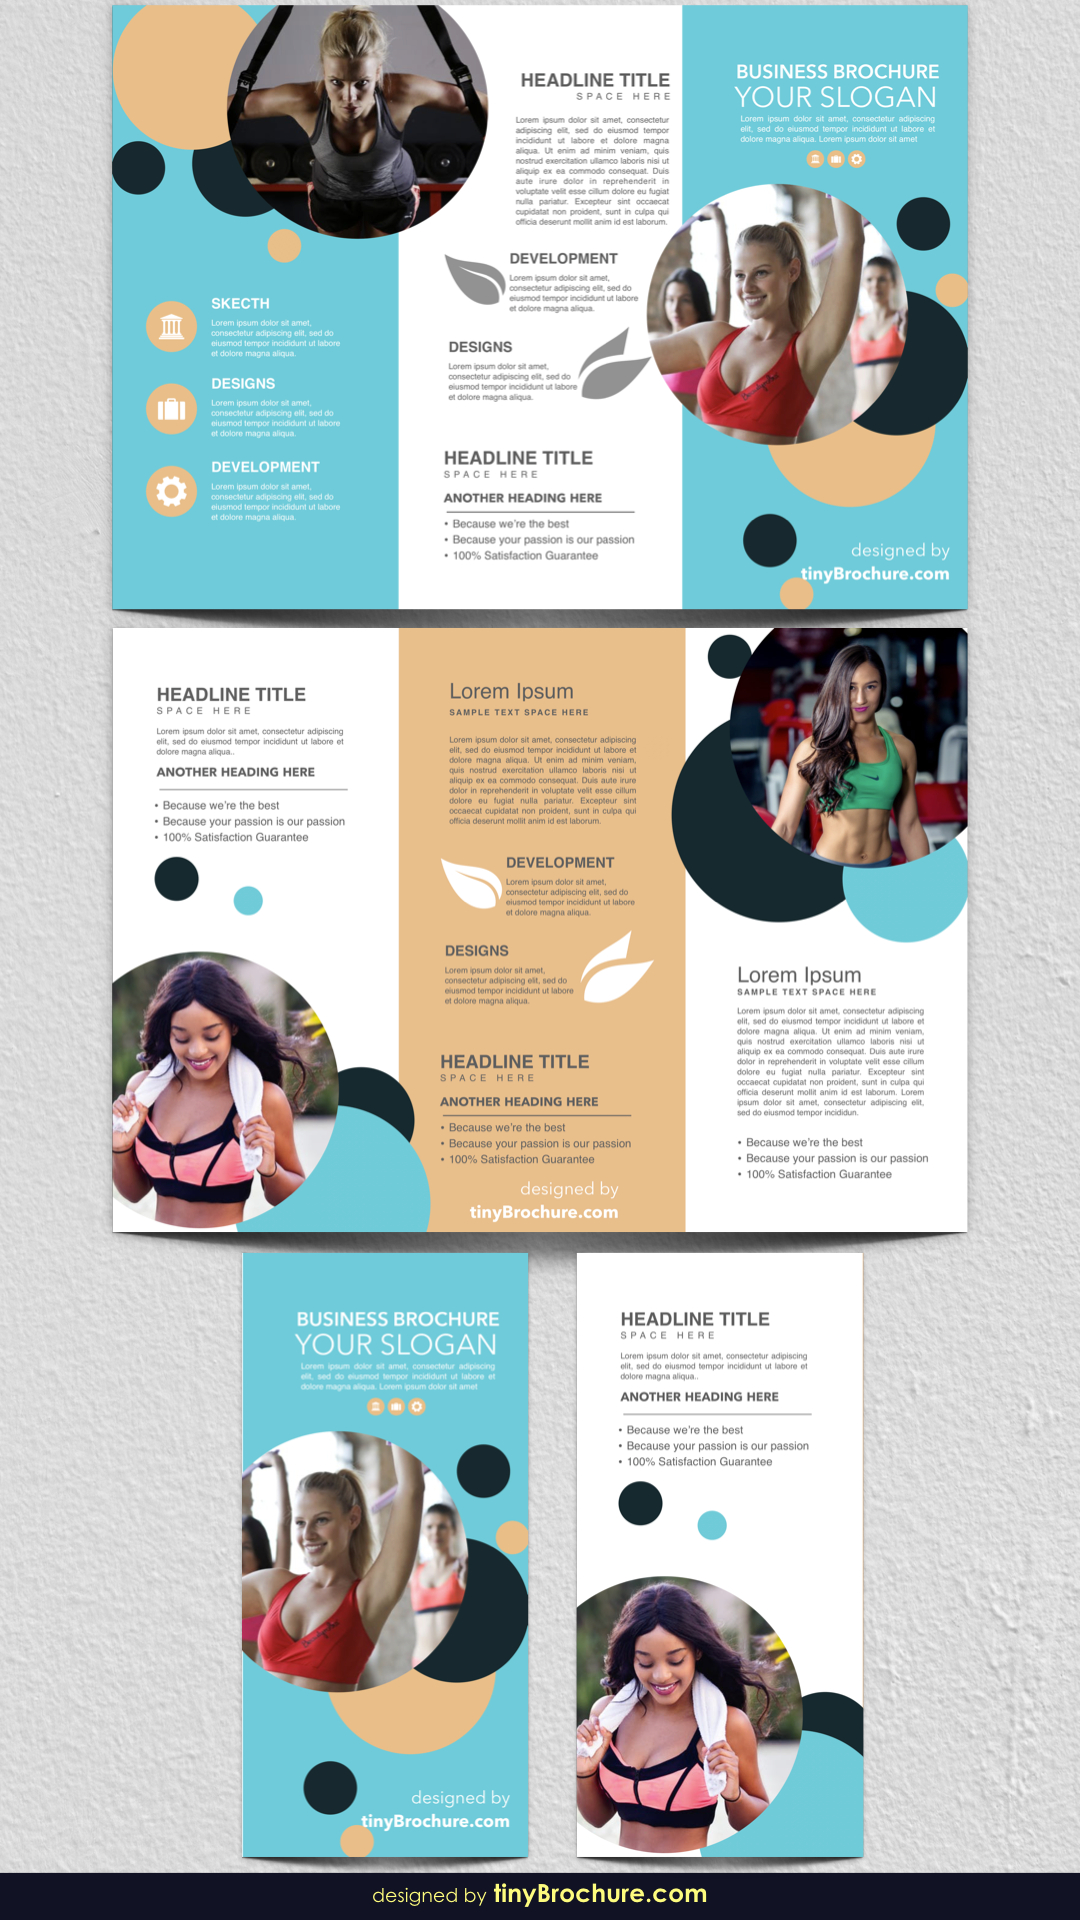 How To Make A Brochure On Microsoft Word 2007 | Design With Regard To Booklet Template Microsoft Word 2007